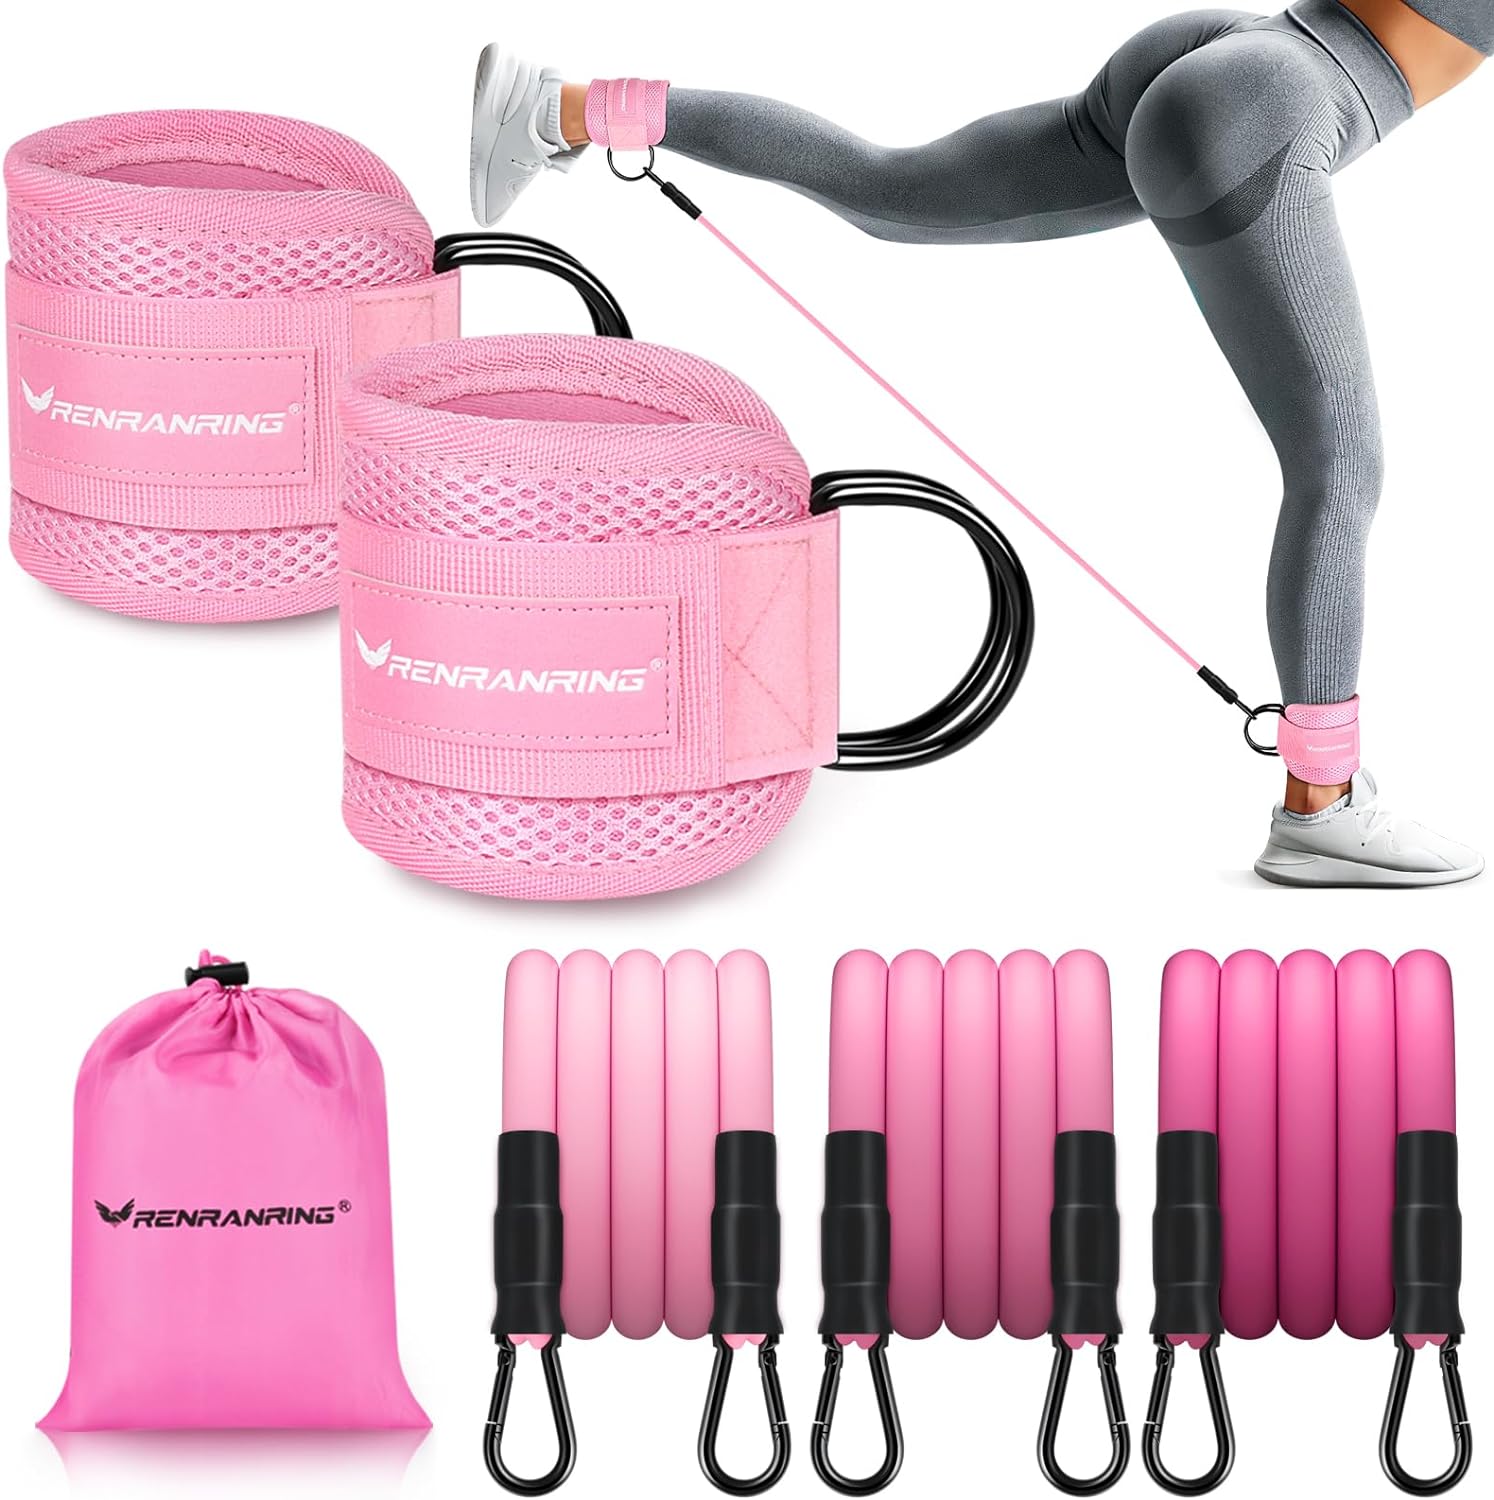 RENRANRING Ankle Resistance Bands with Cuffs, Glutes Workout Equipment, Ankle Bands for Working Out, Butt Exercise Equipment for Women Legs and Glutes (Pink)